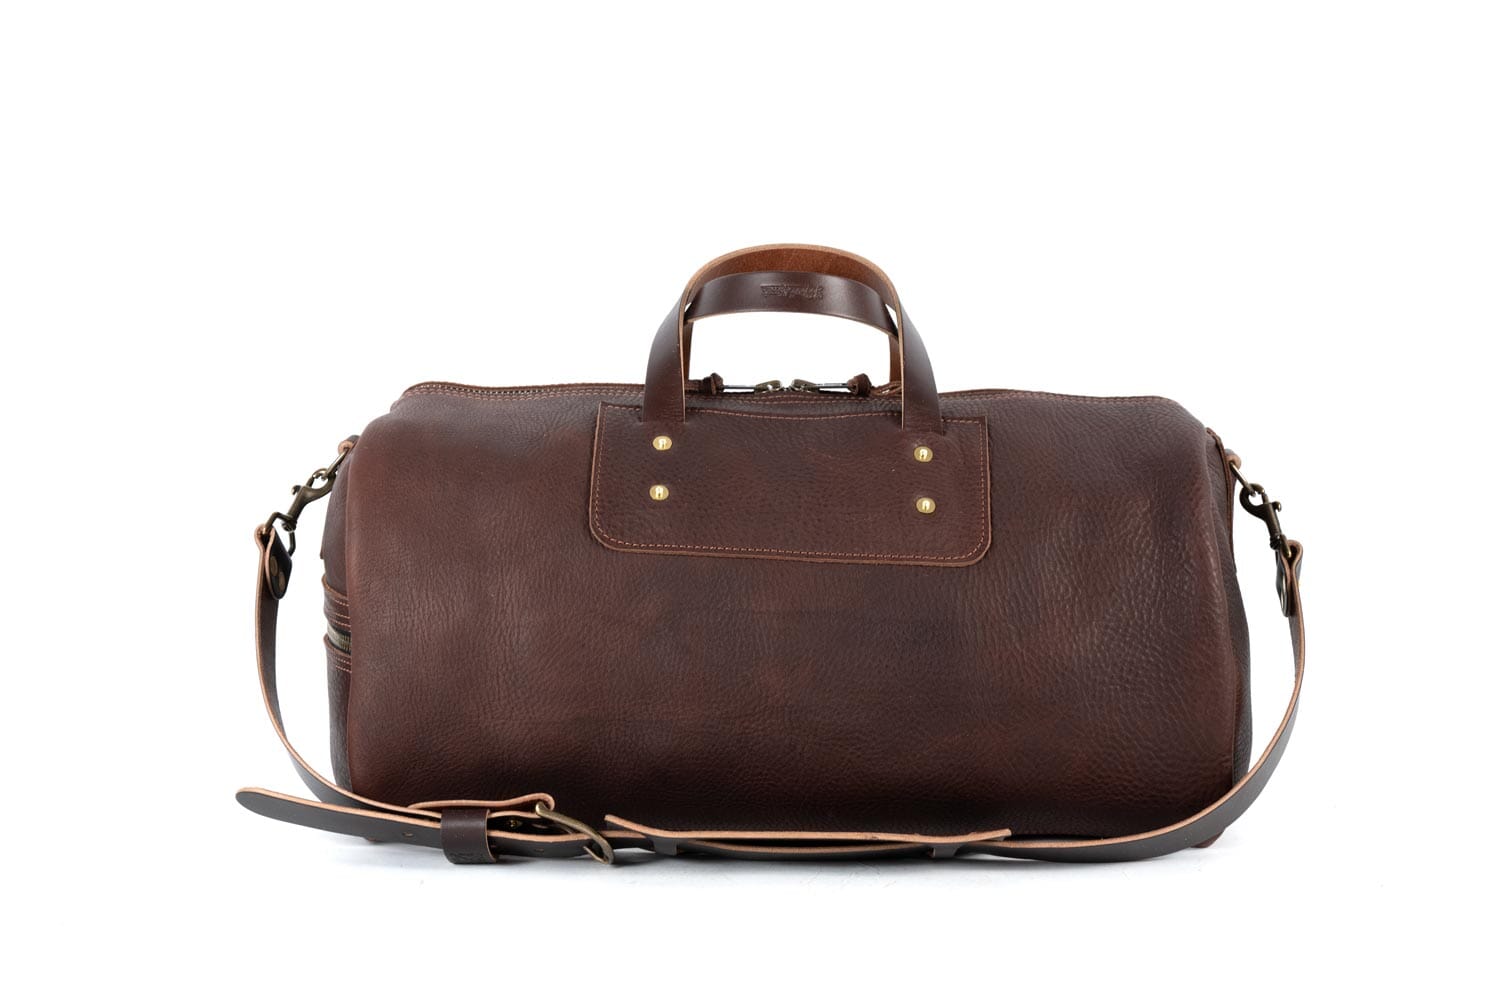 EXPEDITION LEATHER DUFFLE BAG - WEEKENDER - MOCHA